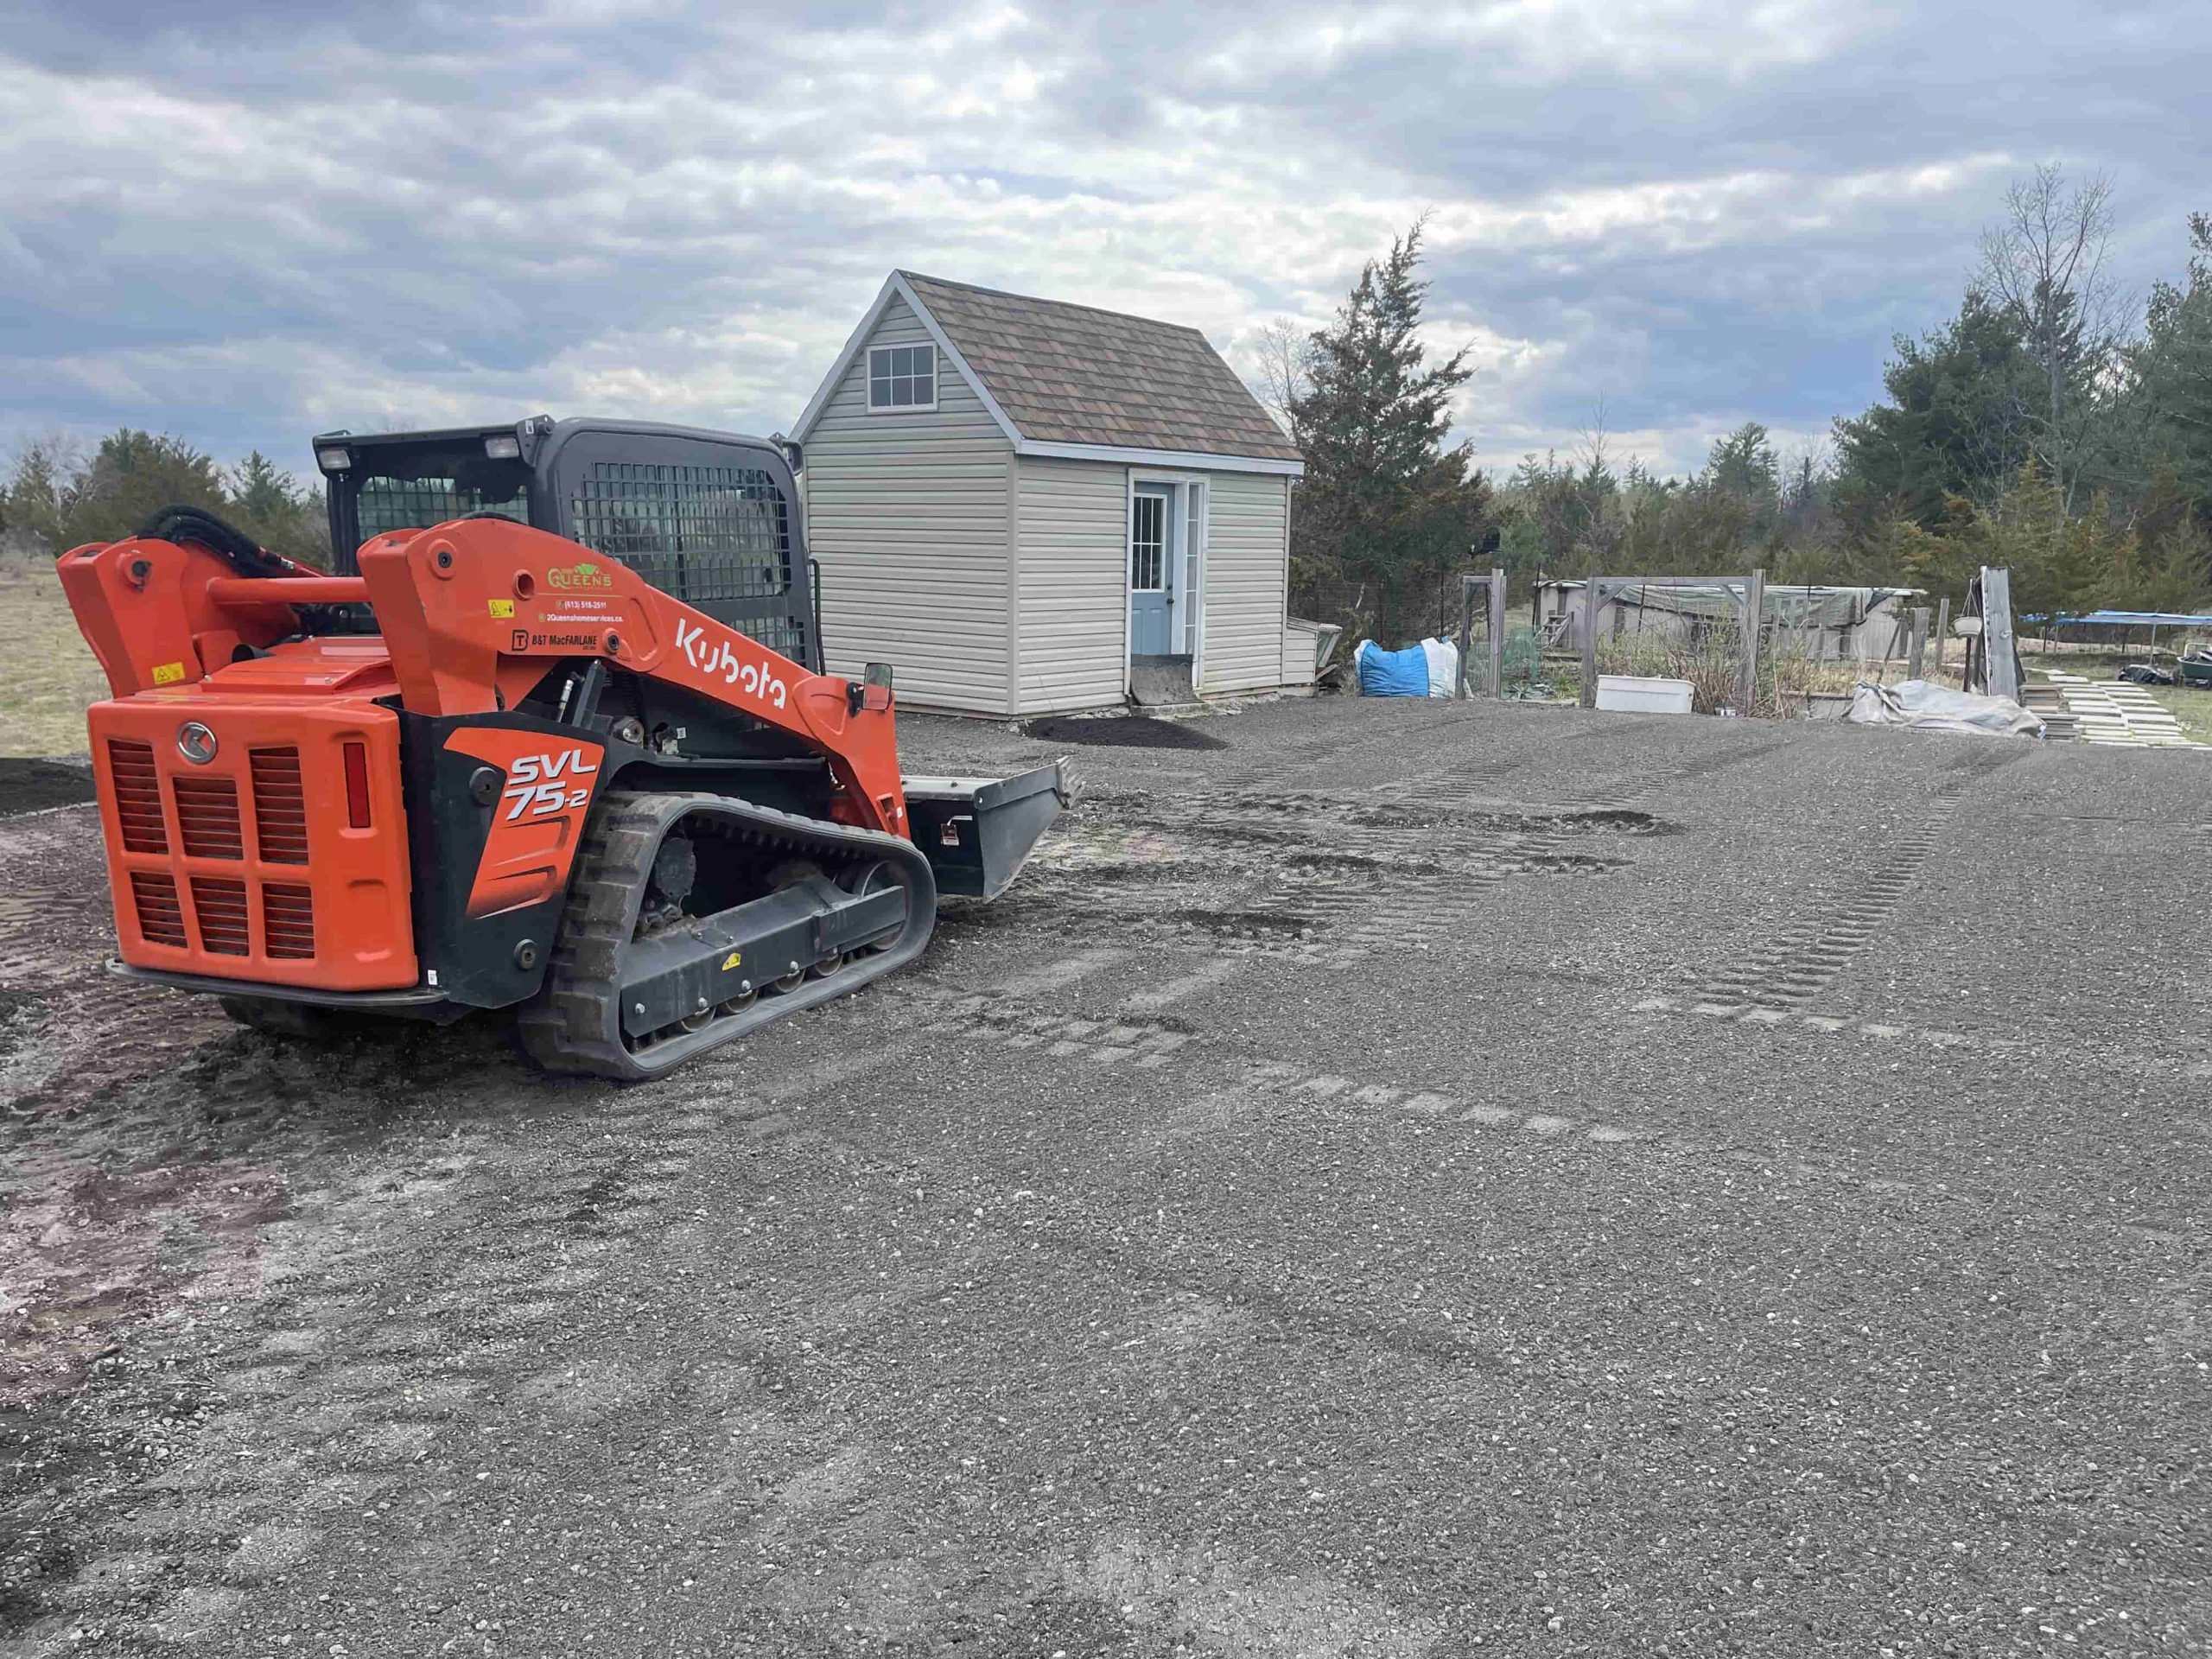 A Kubota track loader is stationed on a recently levelled piece of land, indicating ongoing land preparation.